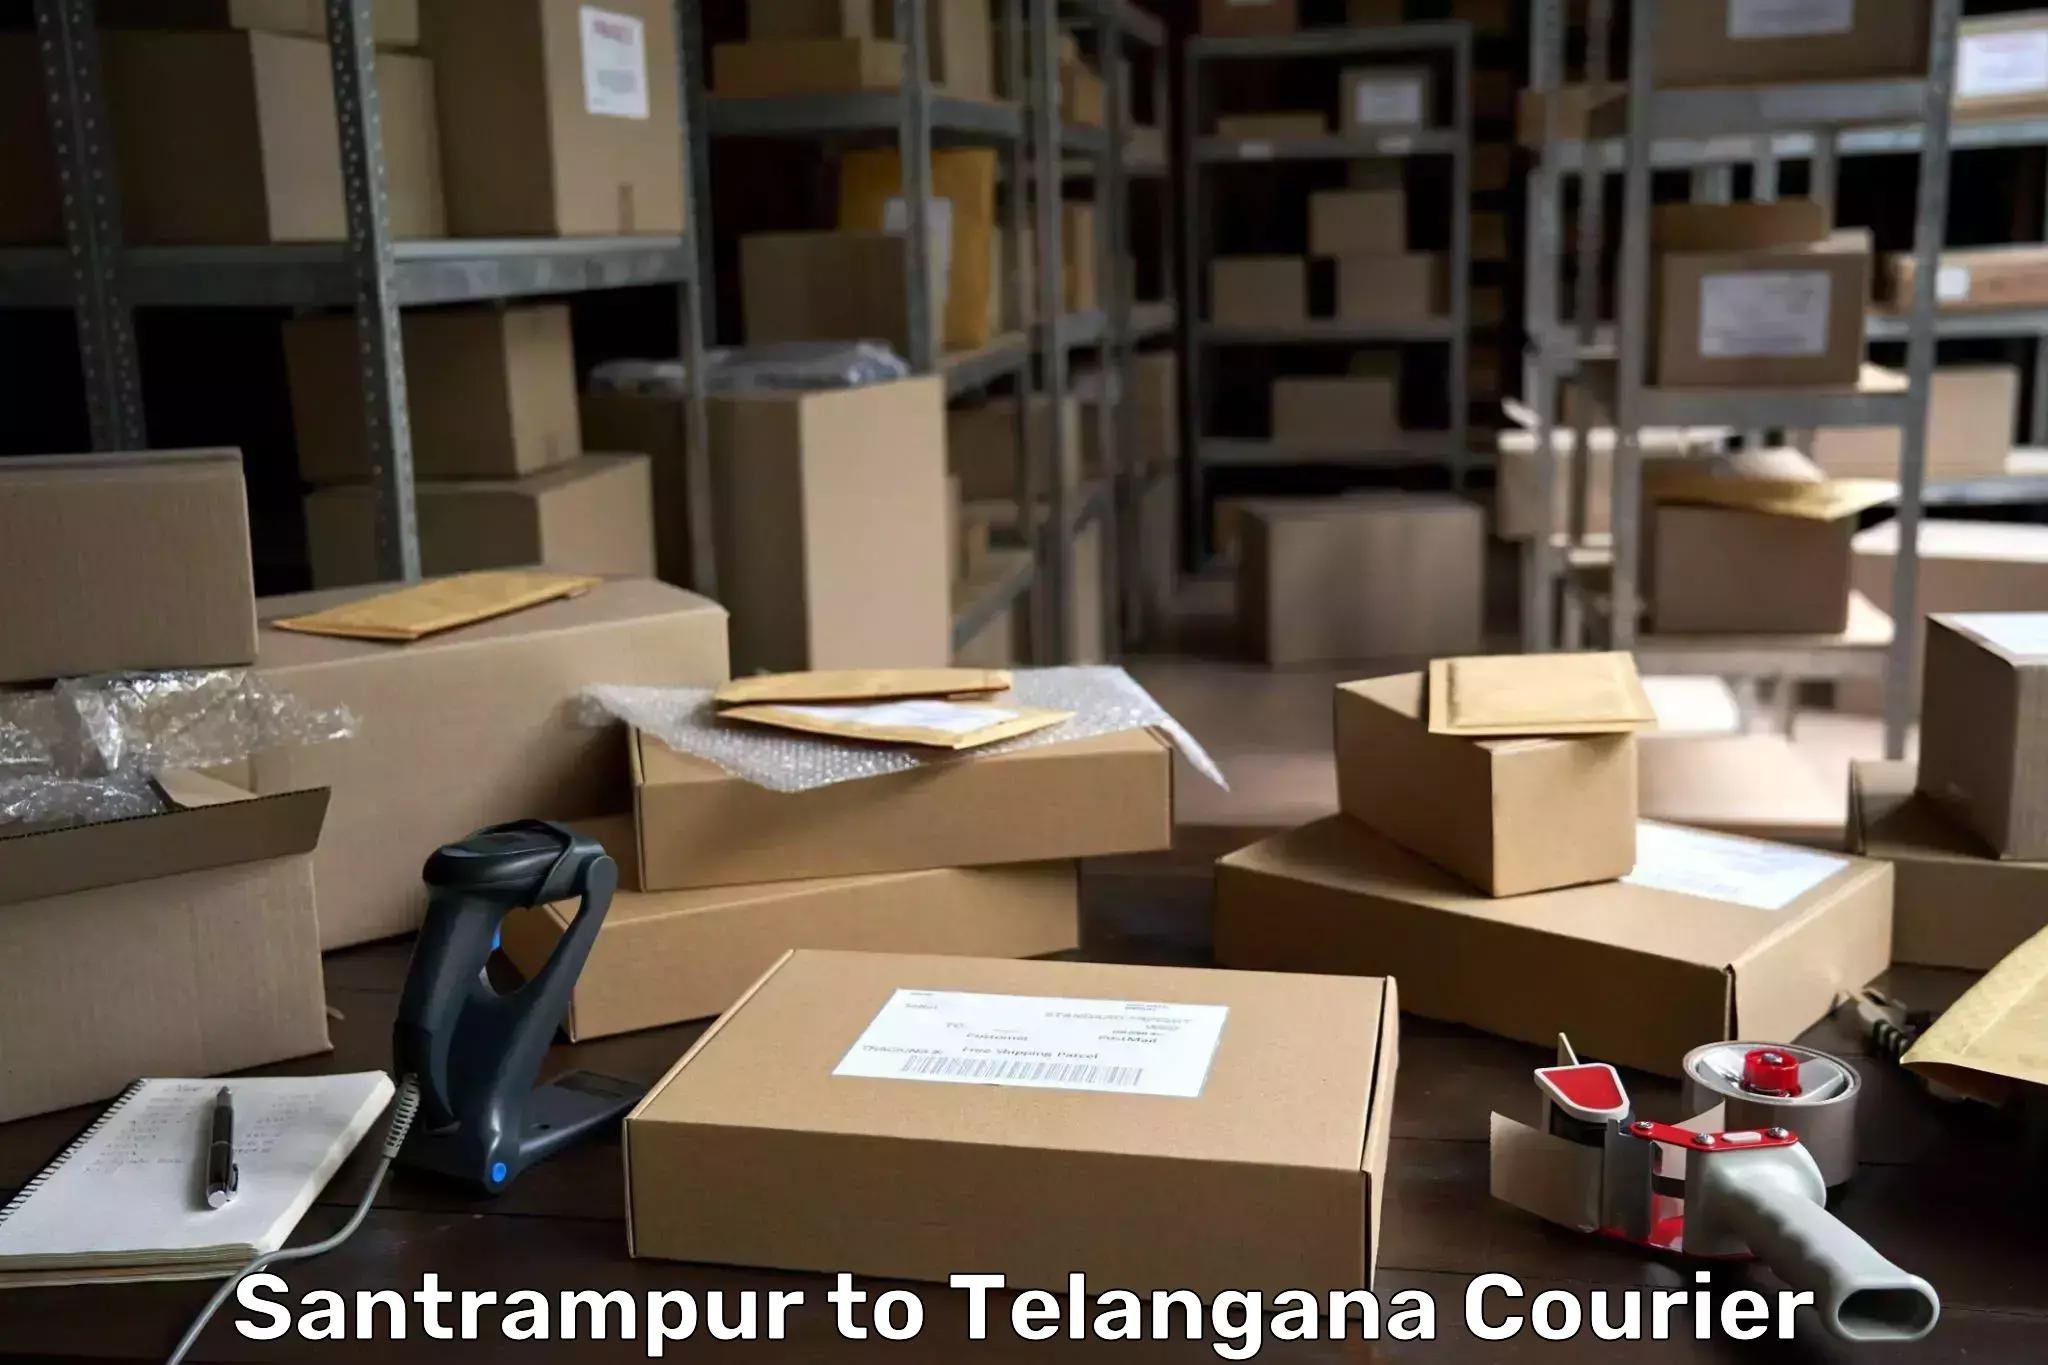 User-friendly delivery service Santrampur to Telangana